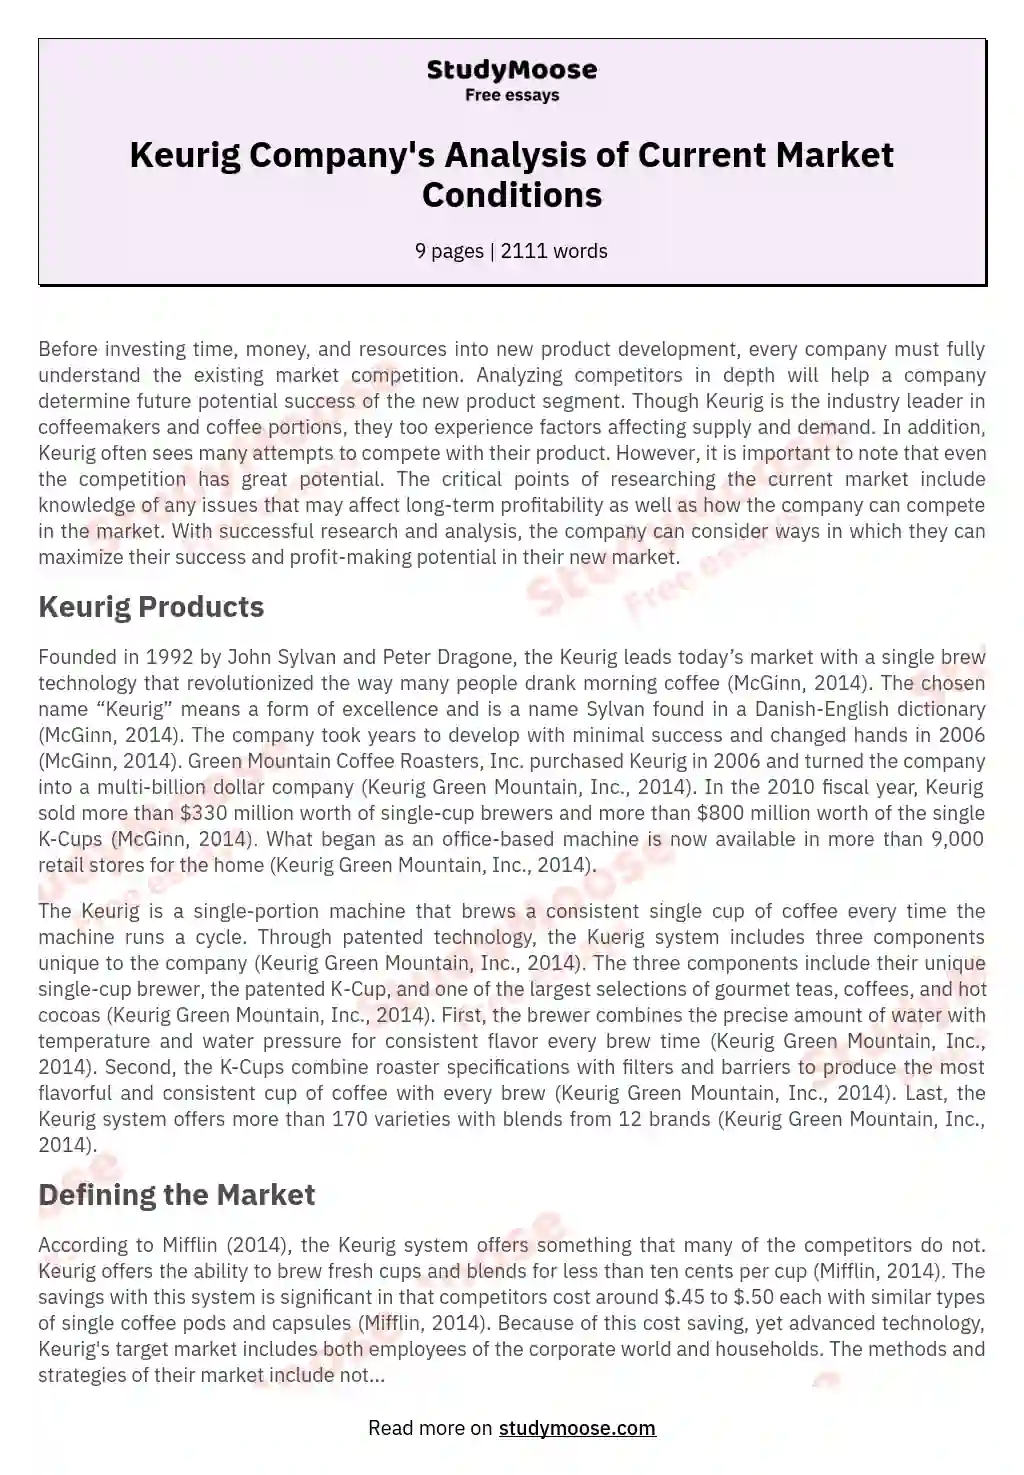 Keurig Company's Analysis of Current Market Conditions essay